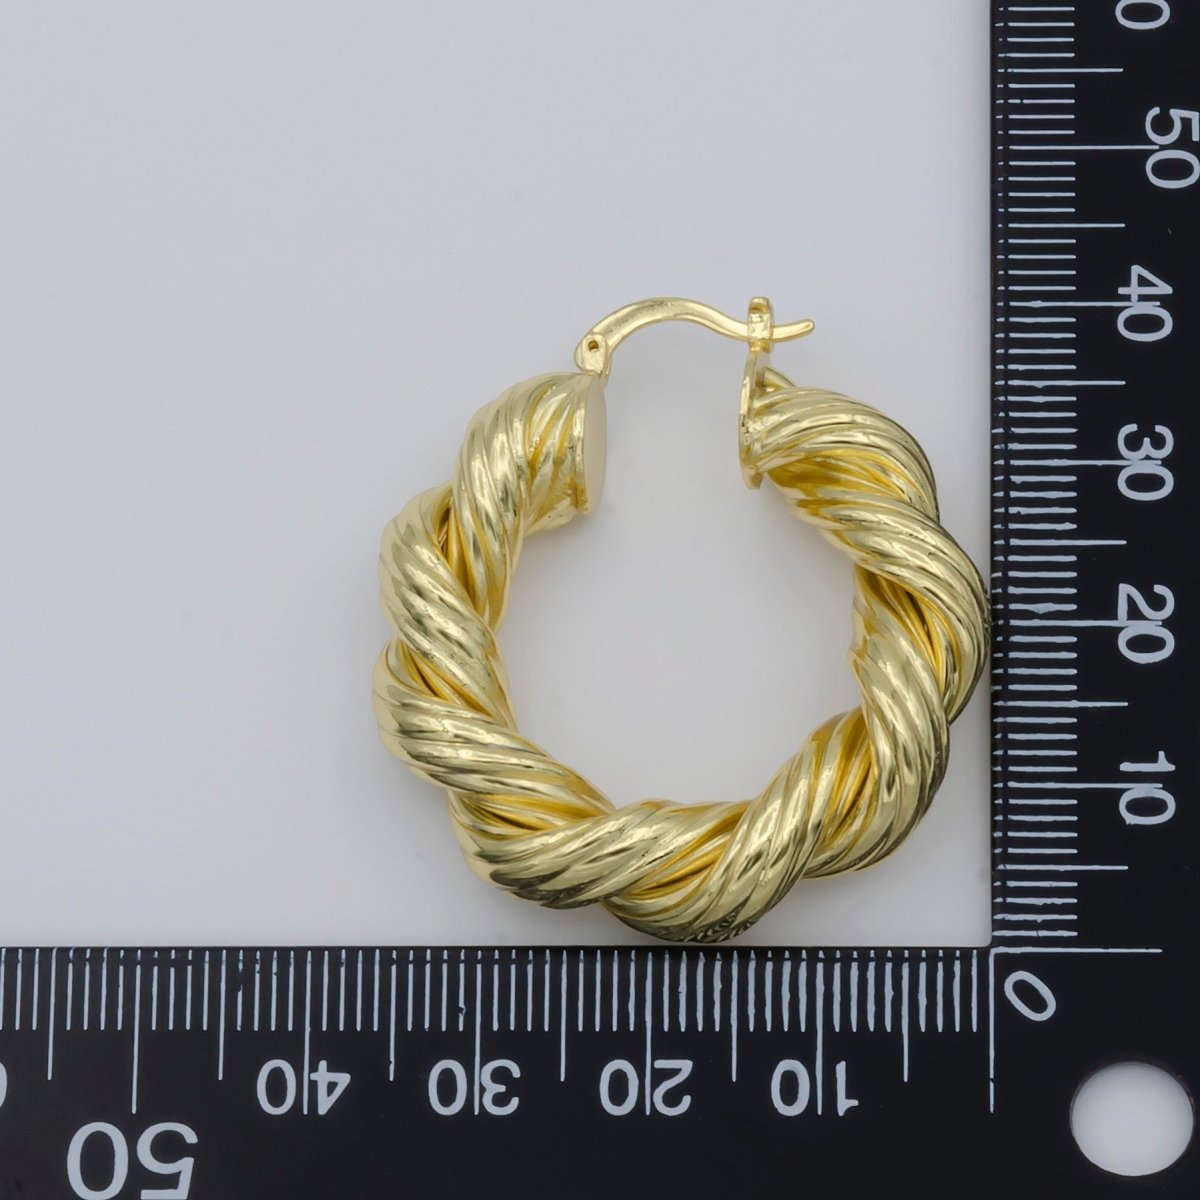 Gold Twisted Hoop Round Earrings, Plain Gold Filled Geometric Daily Earring Jewelry P-106 - DLUXCA